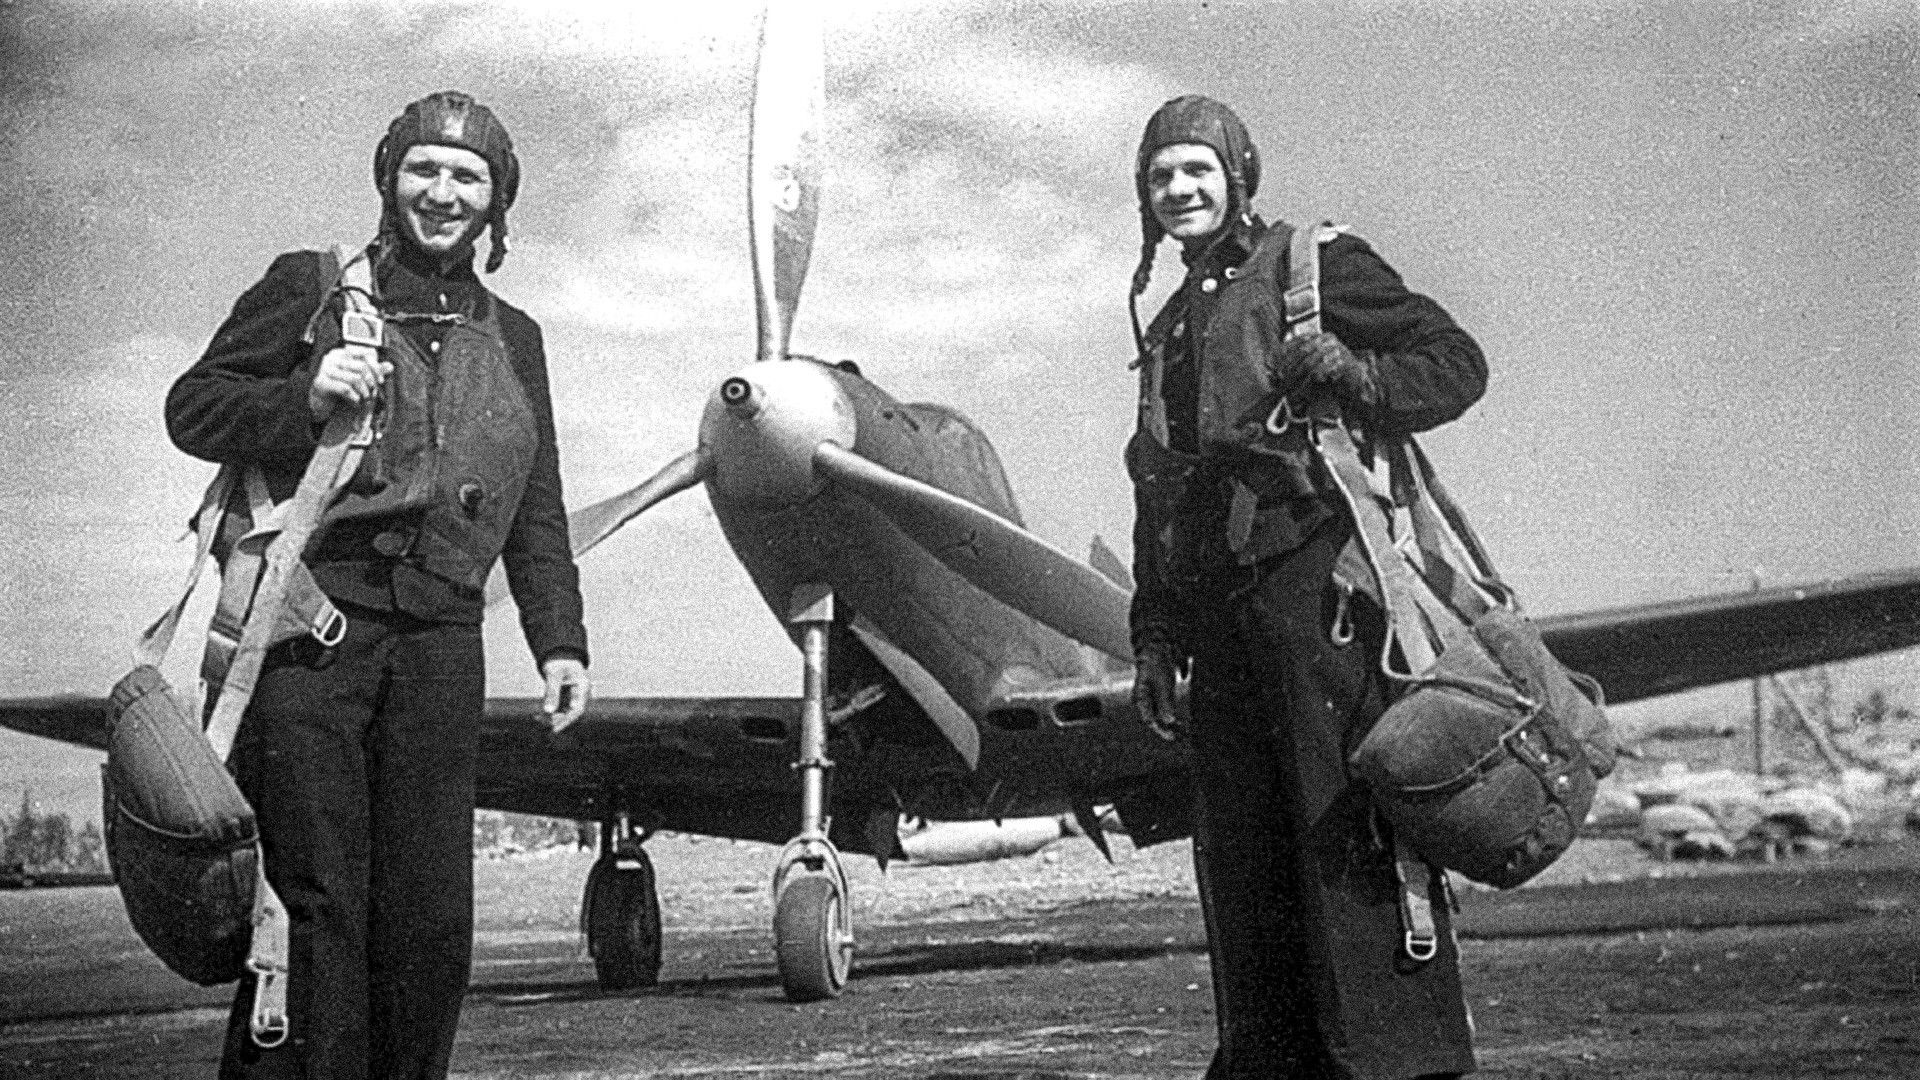 Why did Soviet aces adore this U.S. fighter?